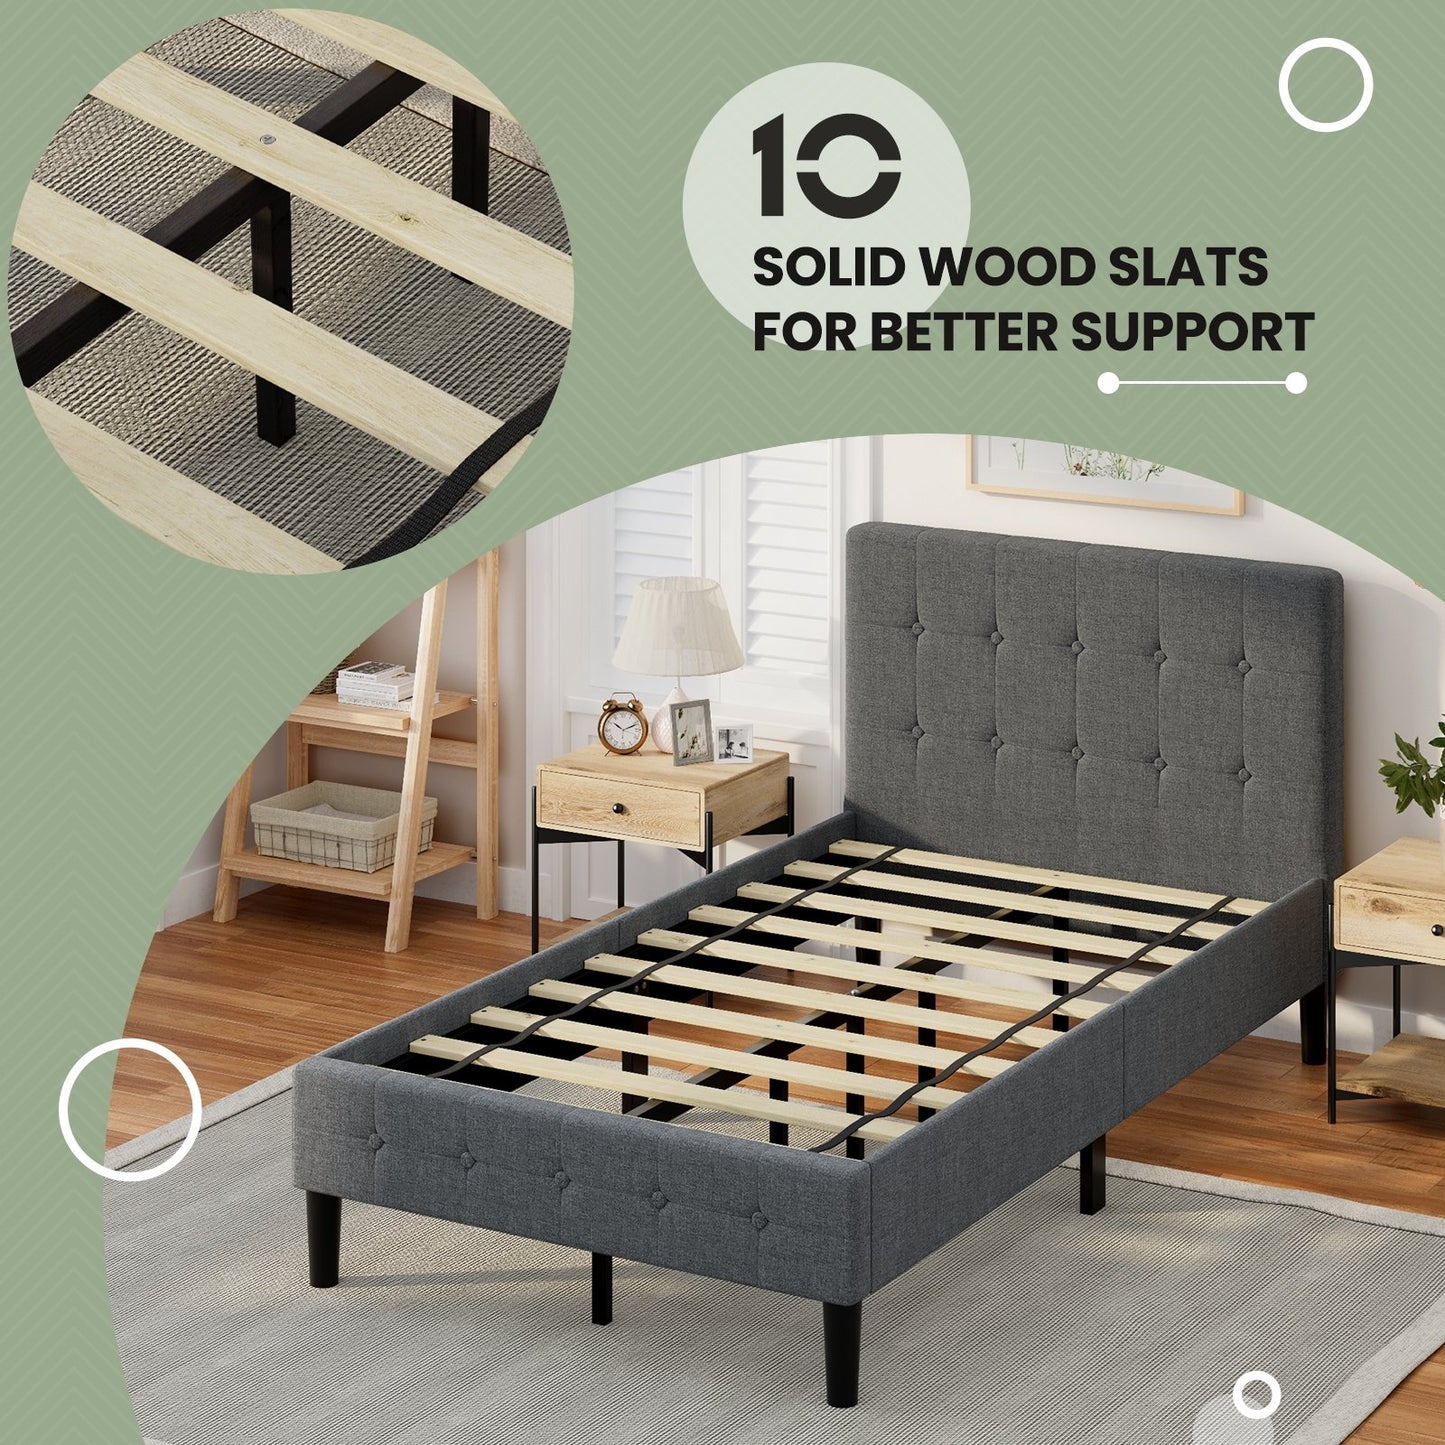 Platform Bed with Button Tufted Headboard, Gray